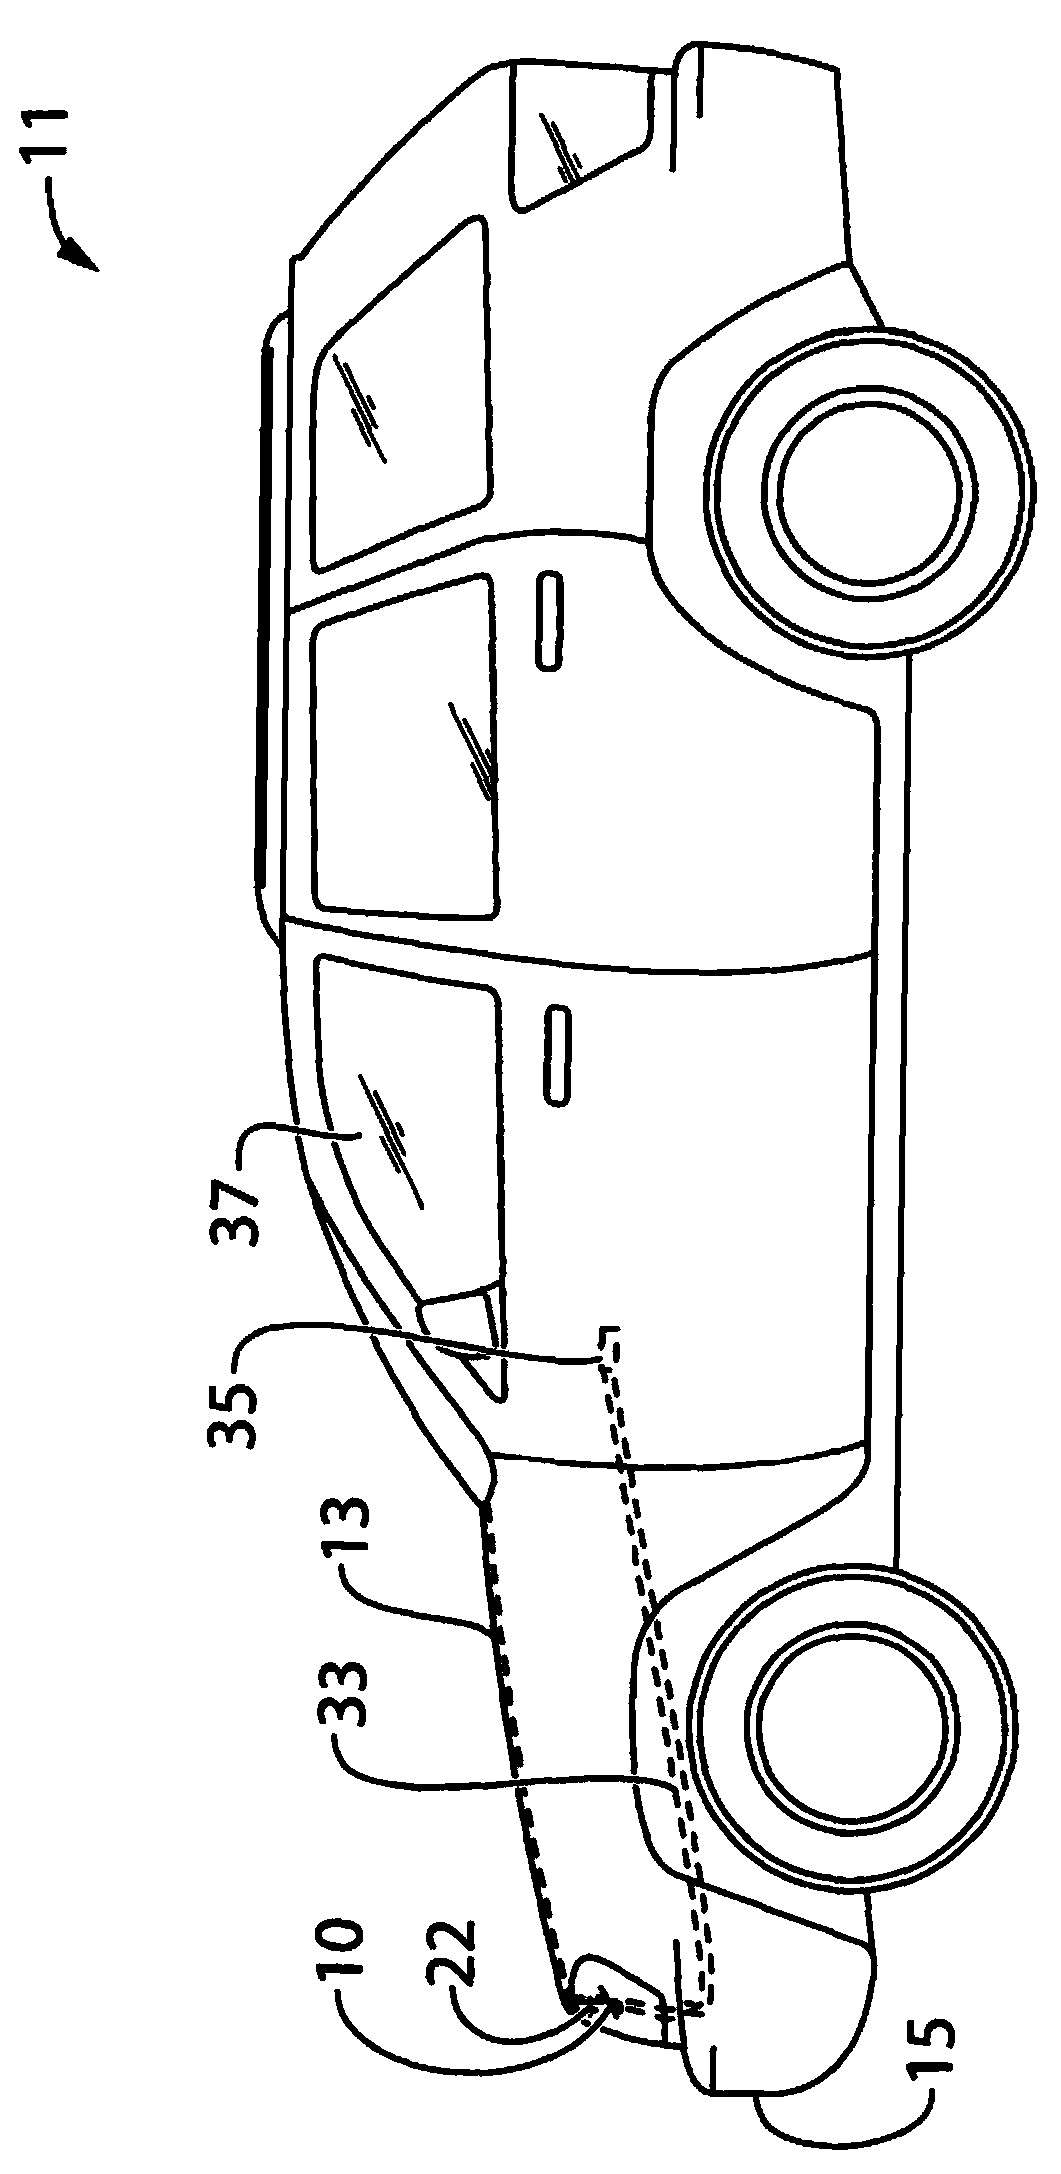 Double pull latch for closure panel such as hood